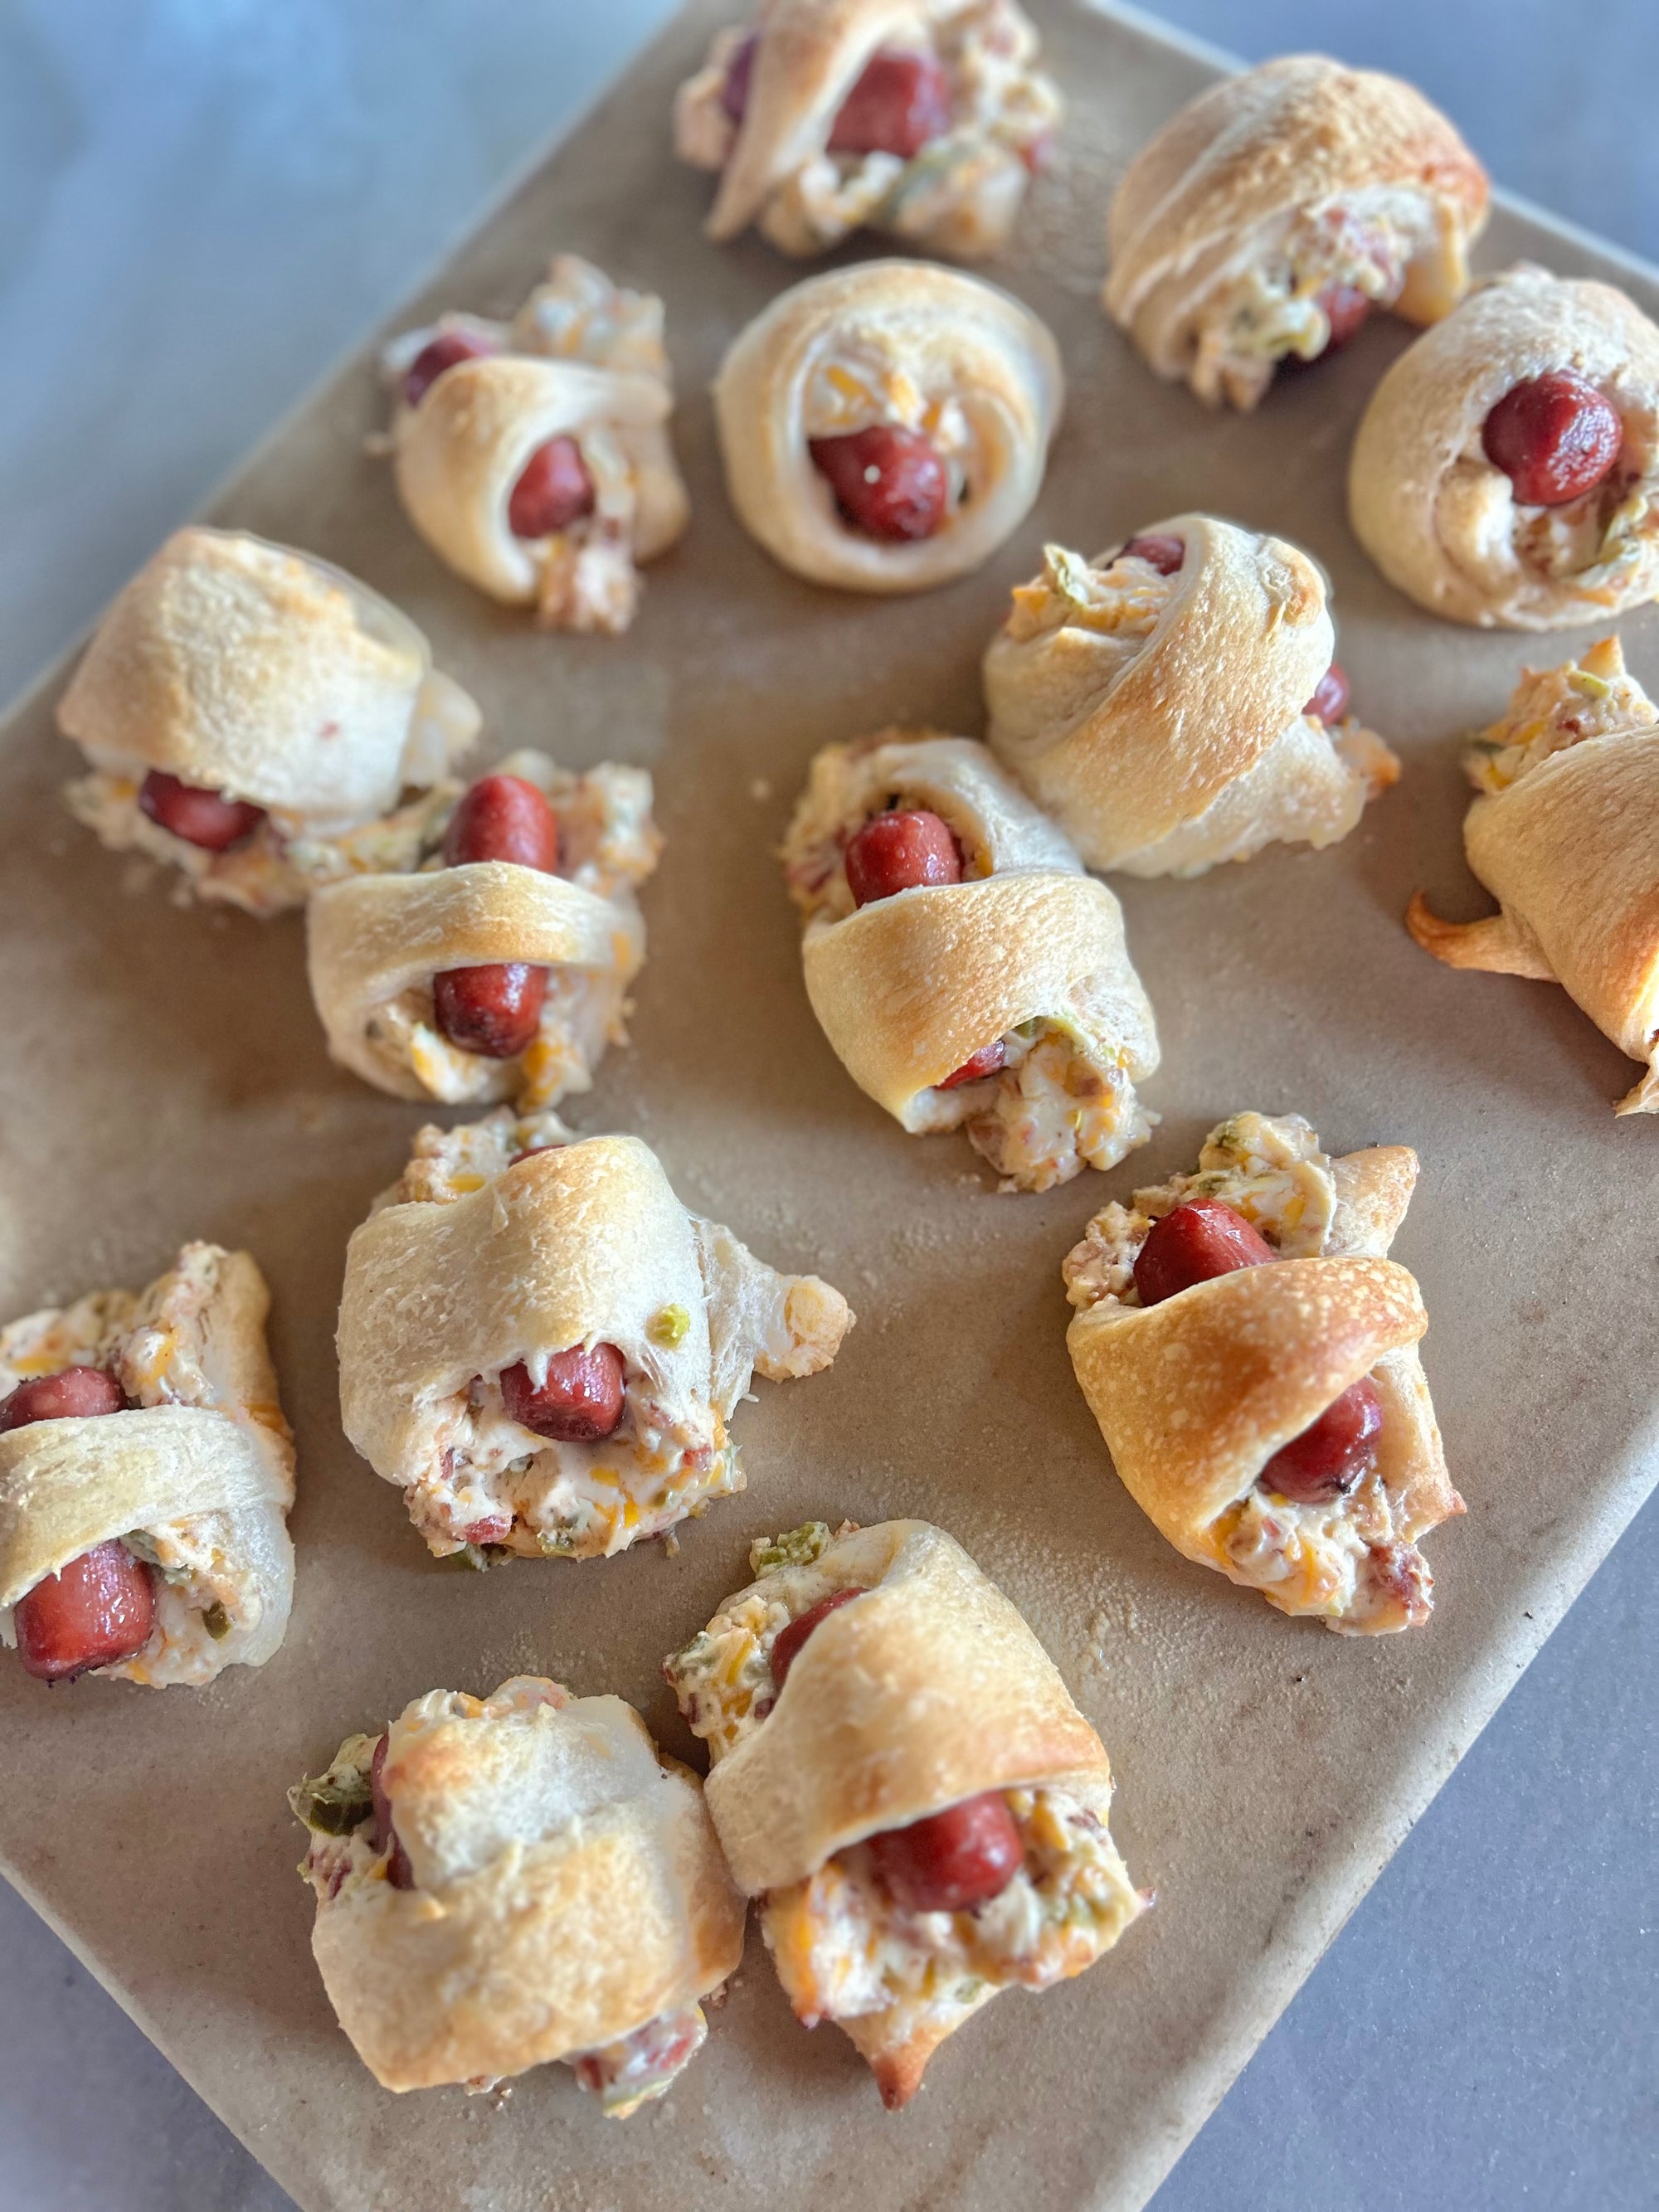 Smoked Jalapeno Popper Pigs In a Blanket